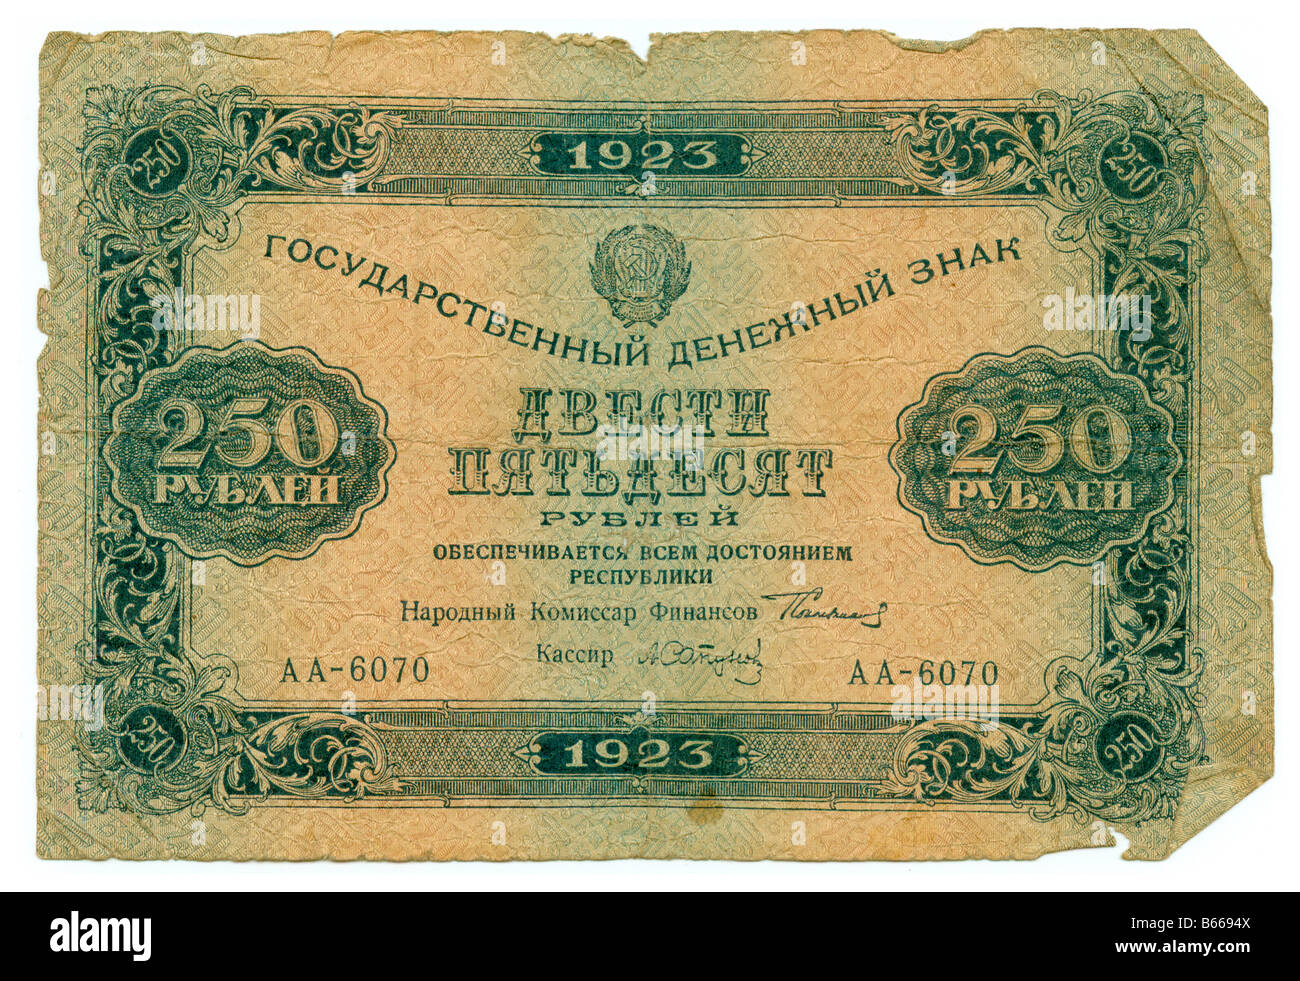 Soviet Communist Cold War Lenin banknote used condition pc2 c1961 25 Rubles 